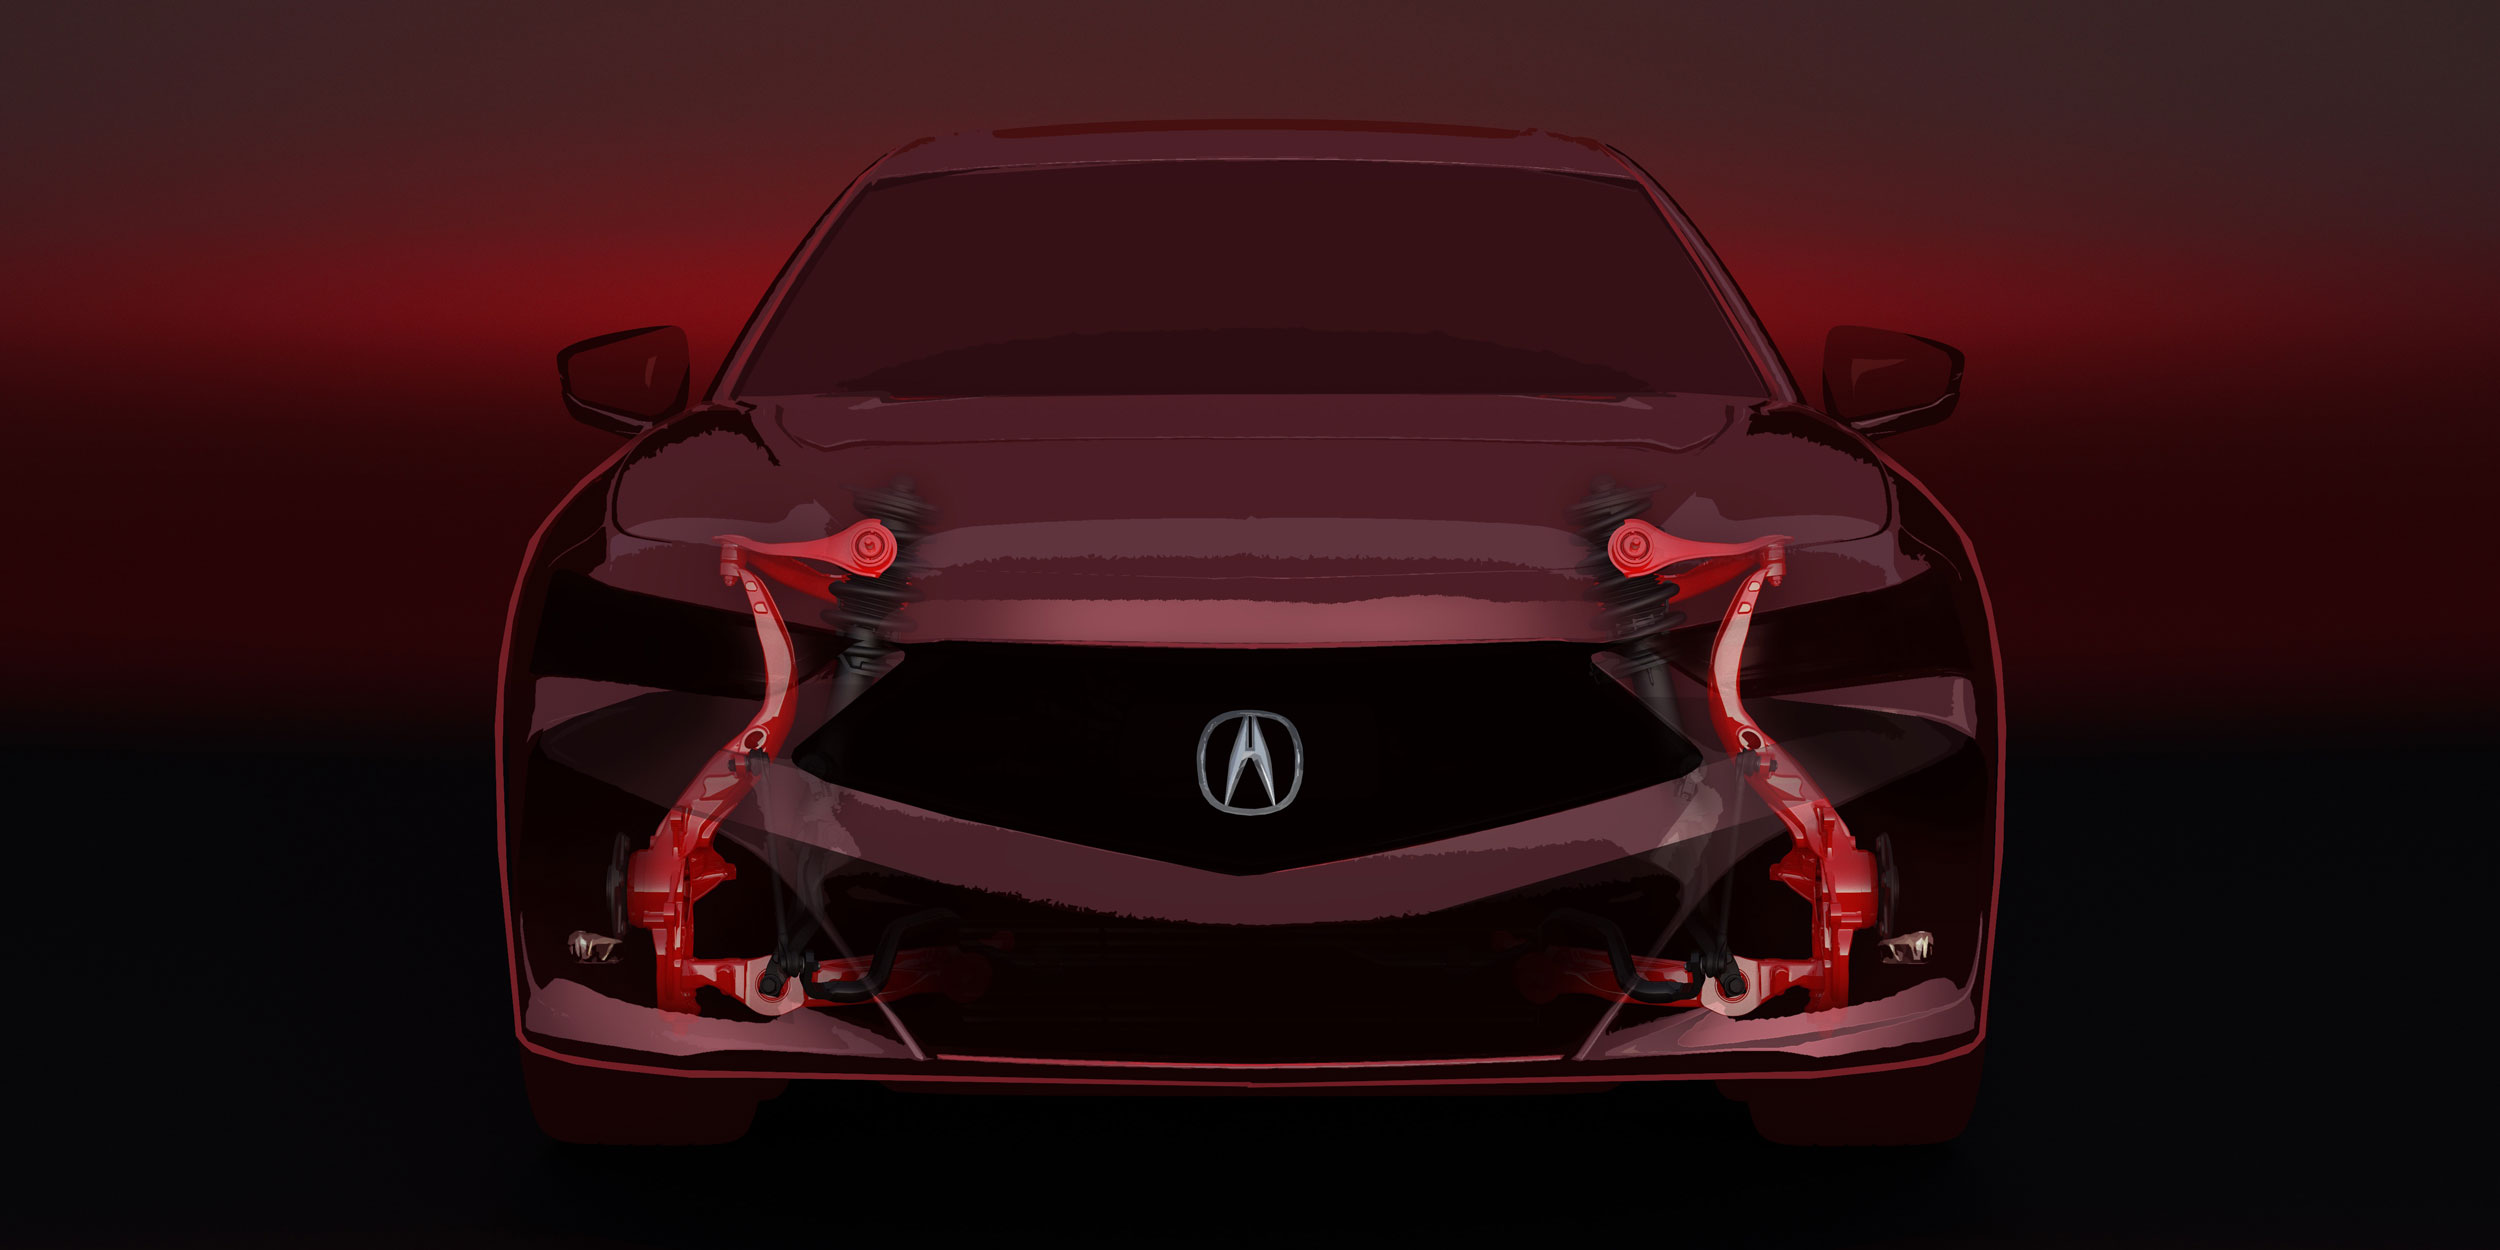 2021 Acura TLX Built On Dedicated Sport Sedan Architecture With Double Wishbone Front Suspension